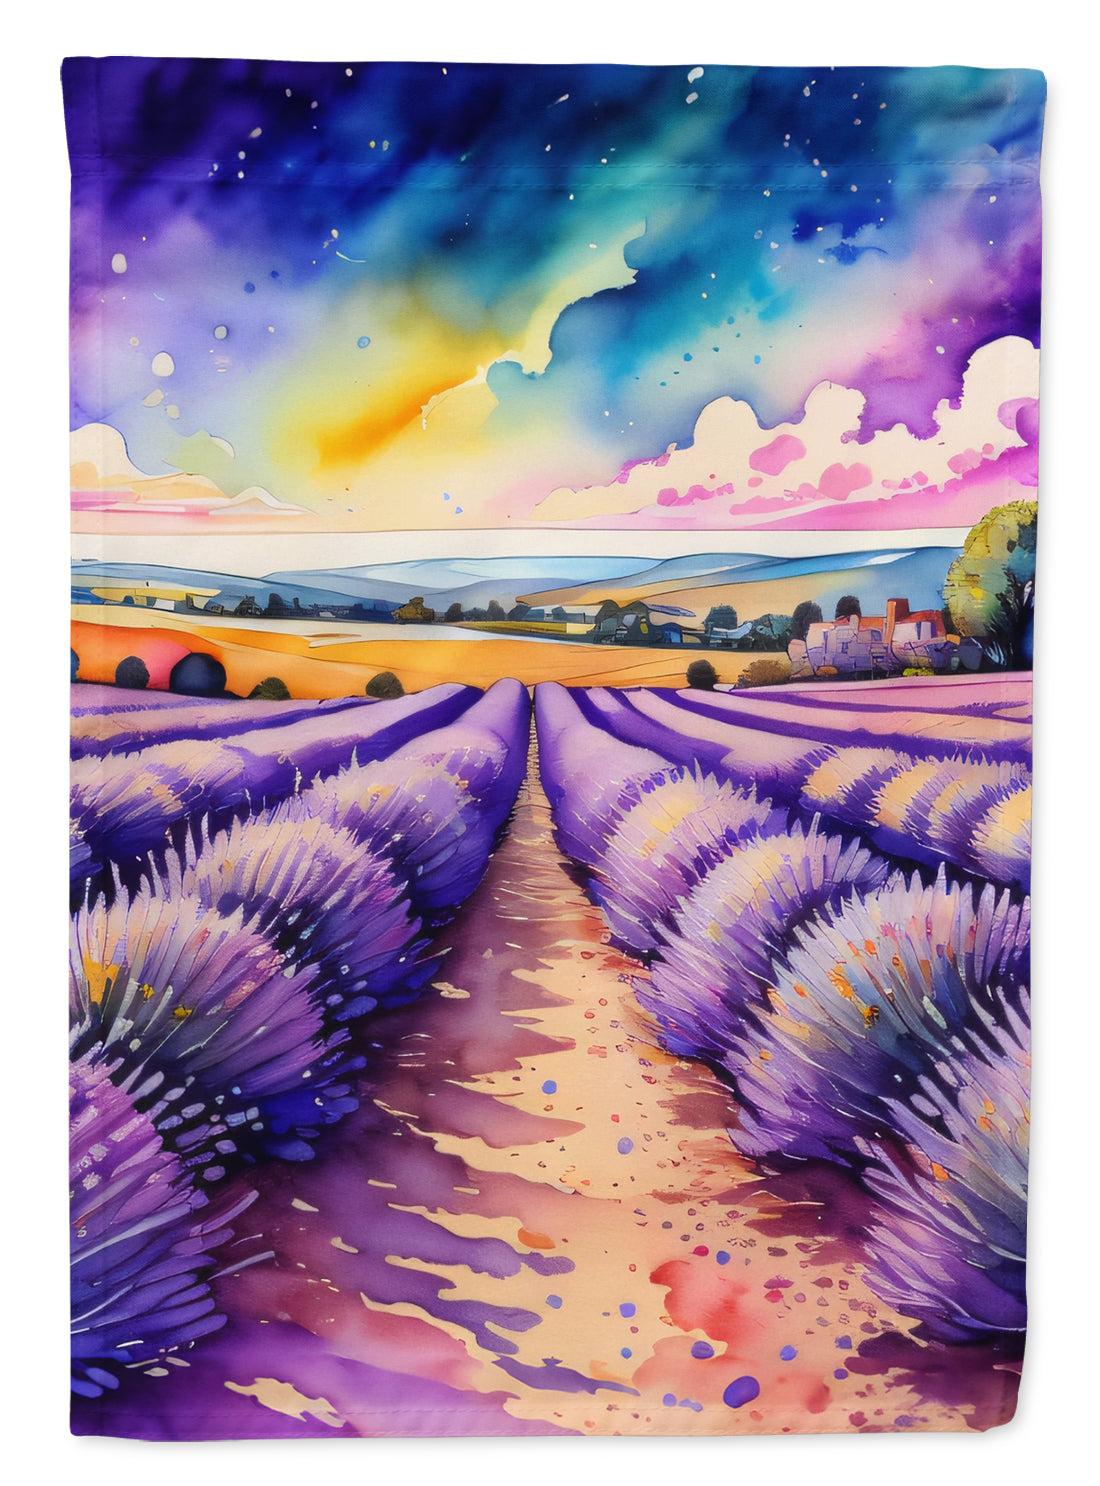 Buy this English Lavender in Color Garden Flag